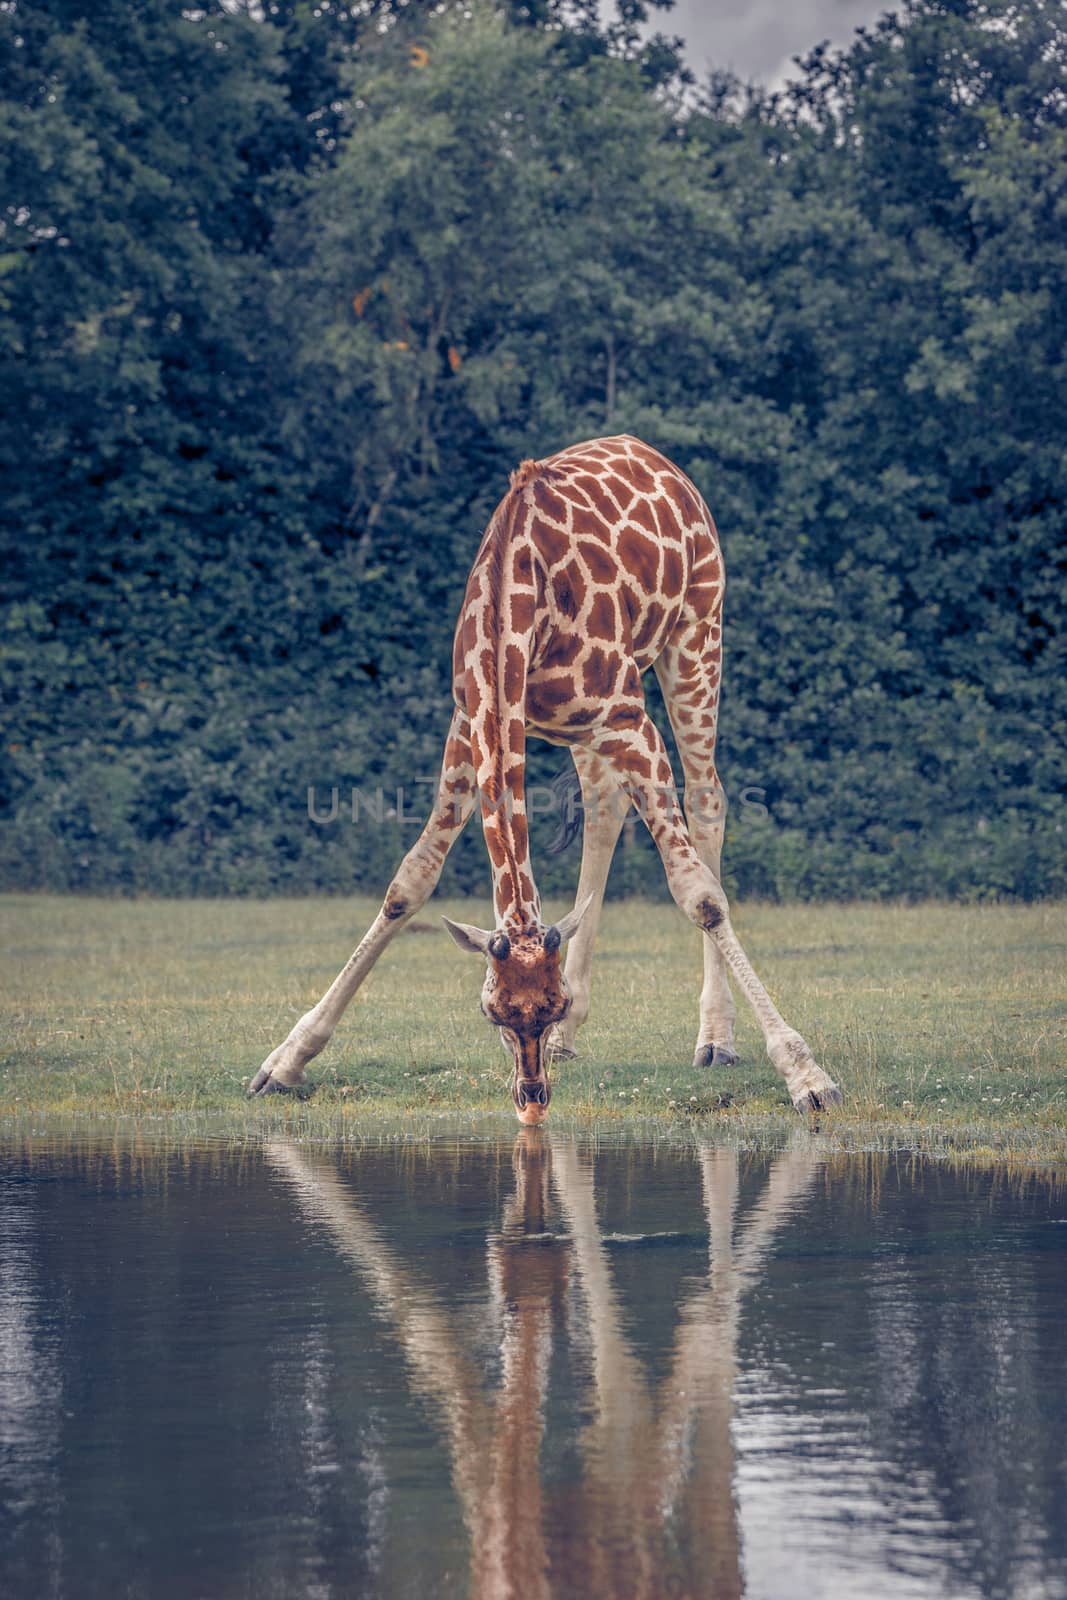 Tall giraffe drinking water at a pond in green nature